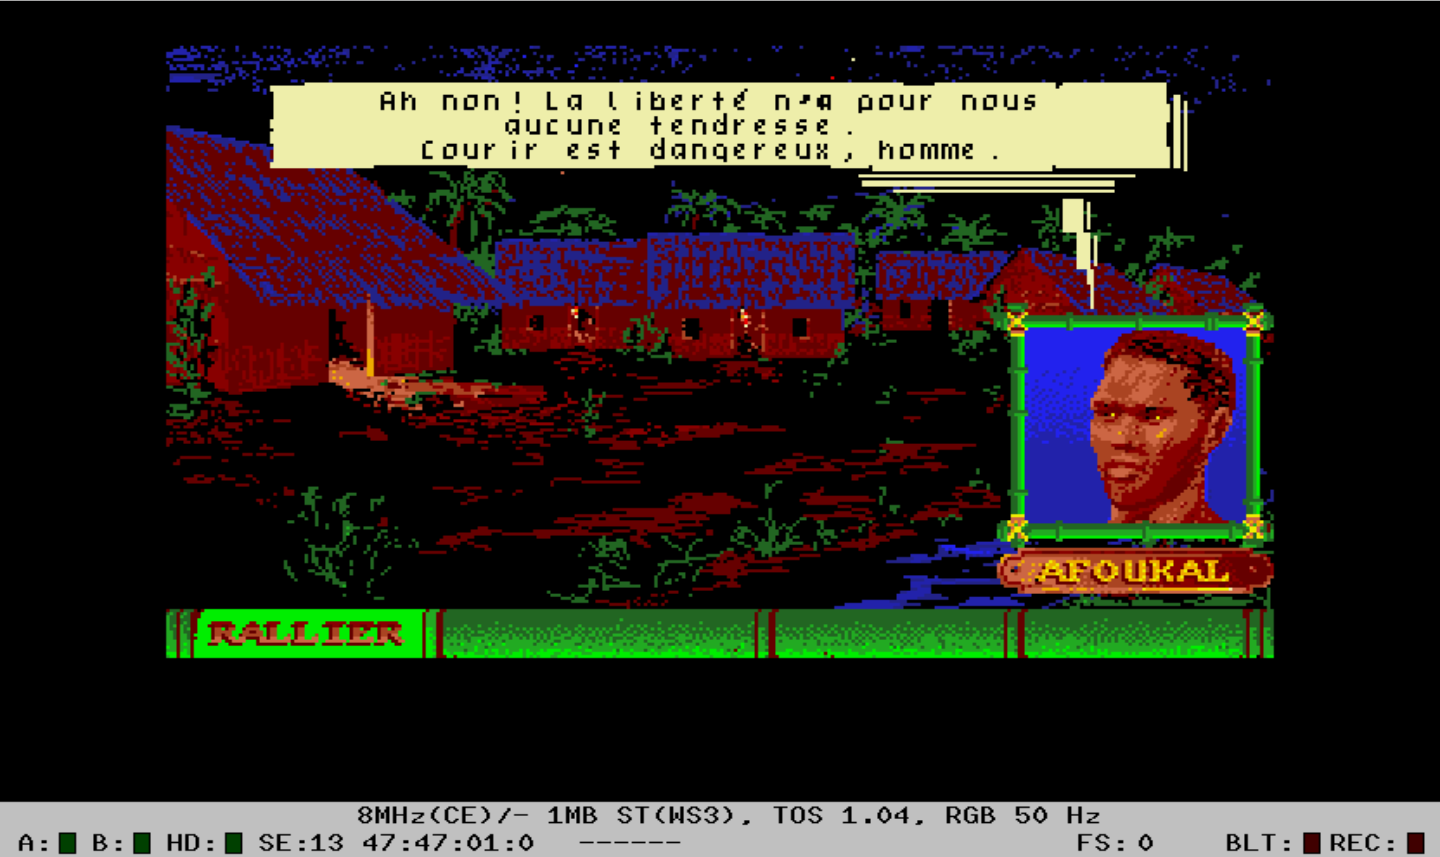 Screen captures from Atari, French version